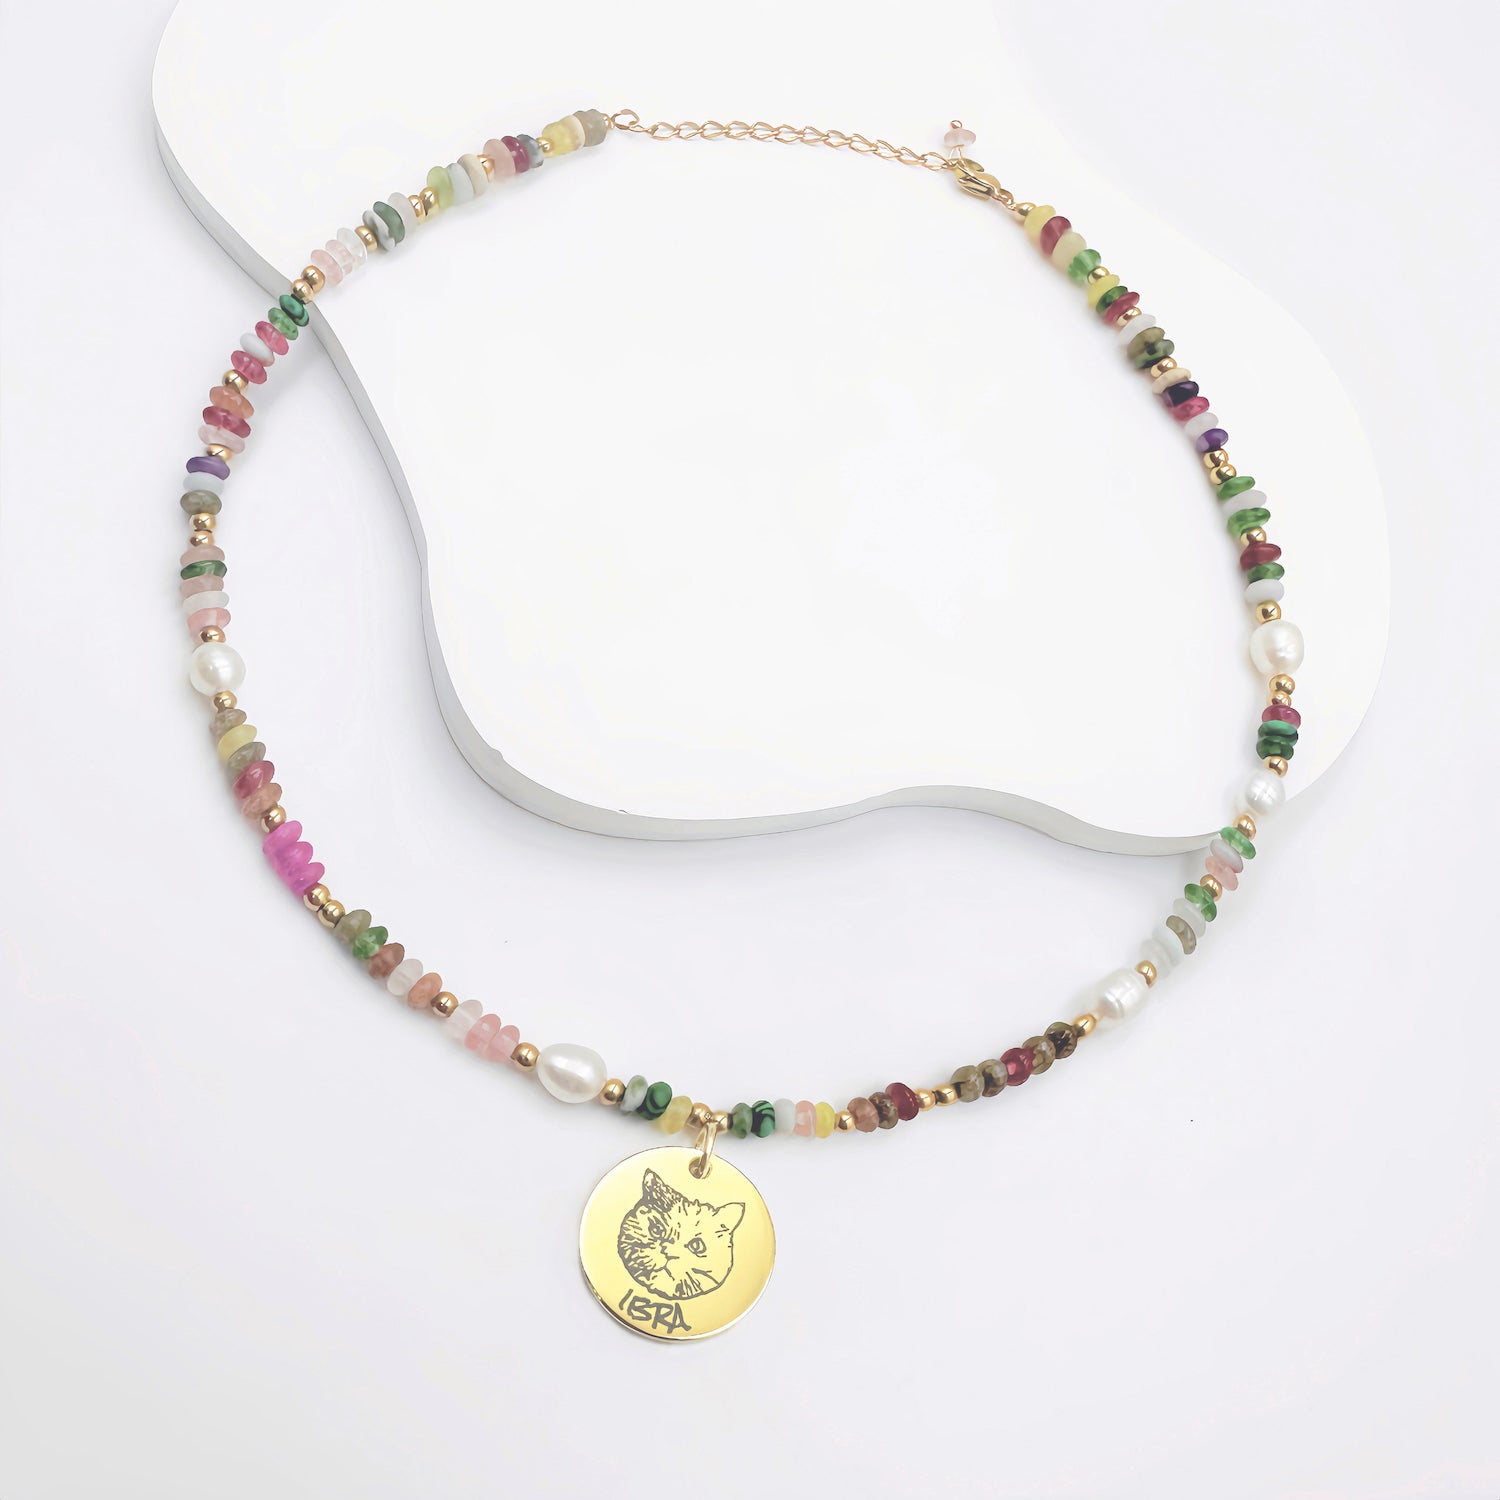 Boltiesd™ Custom Pet Necklace With Natural Stones And Pearls - Boltiesd™